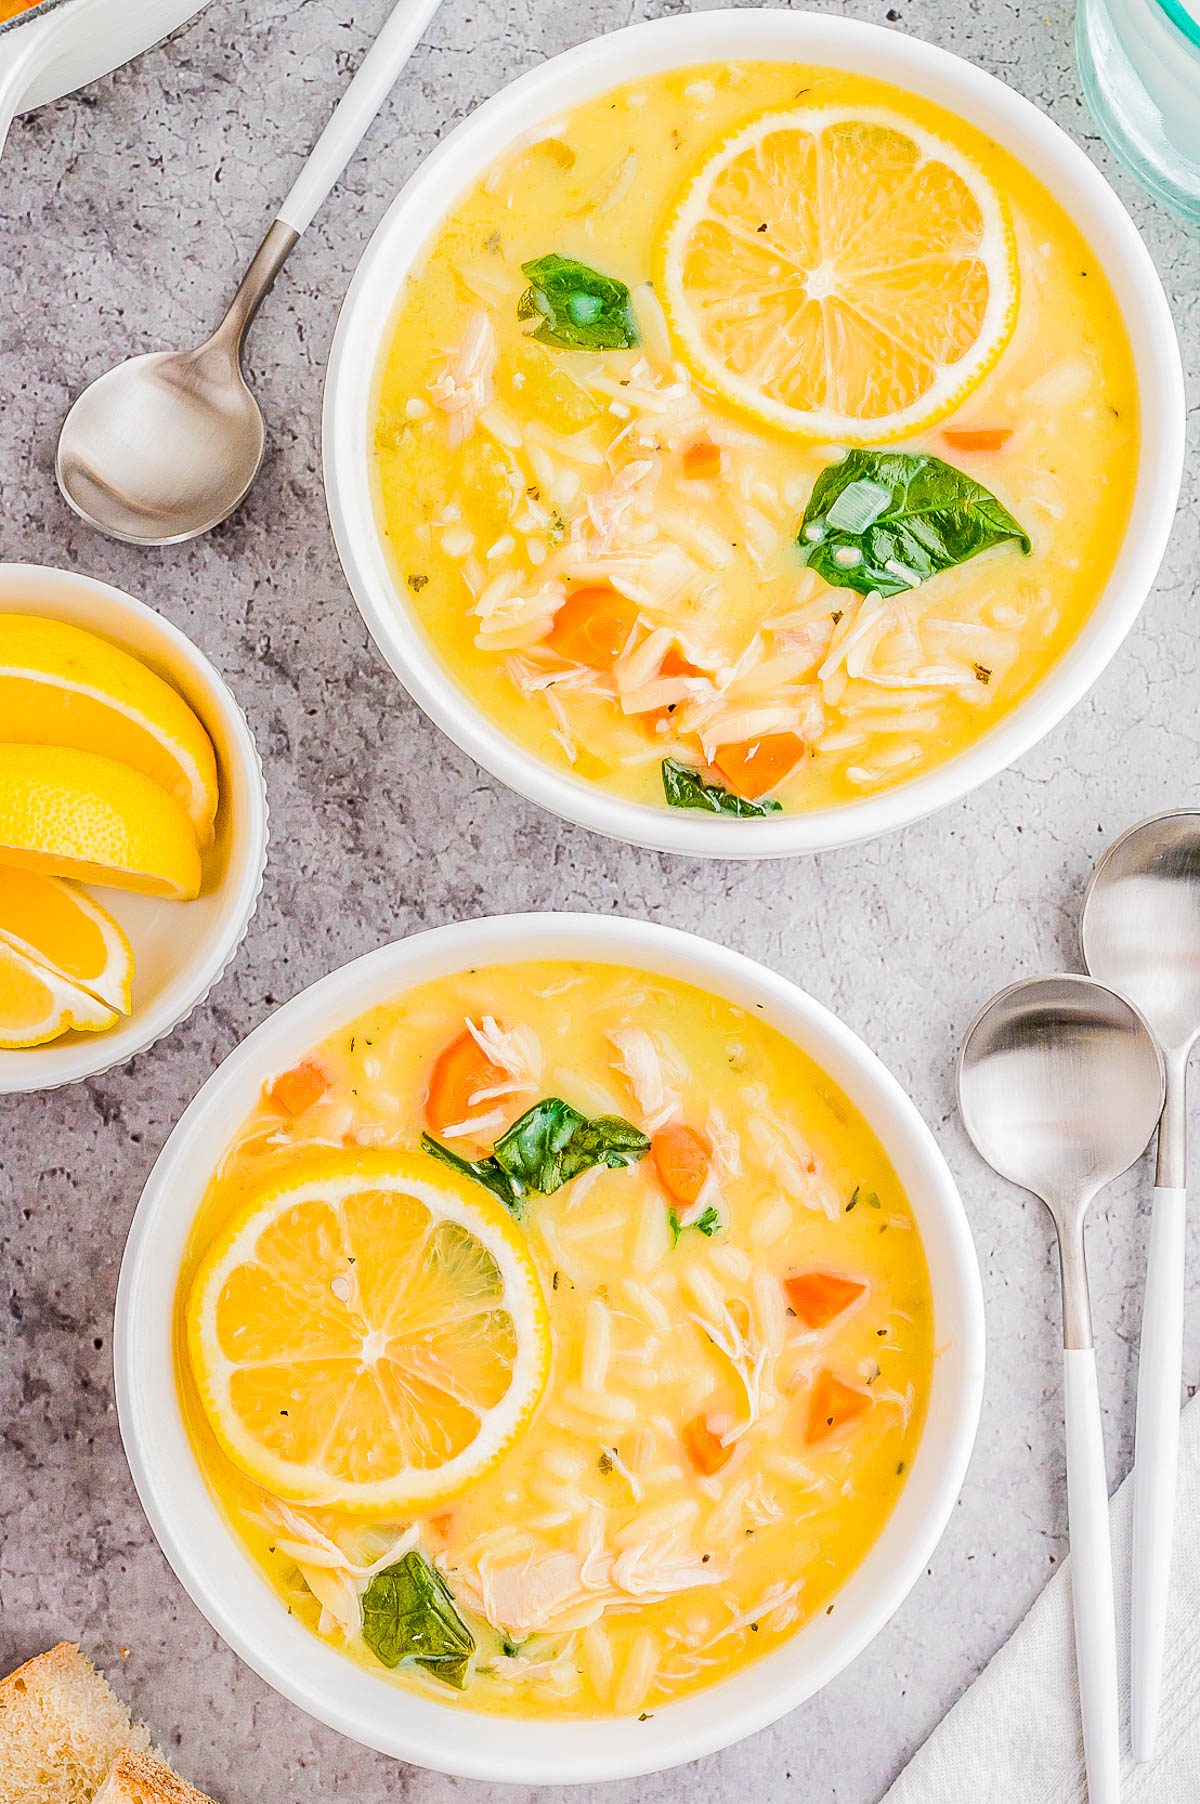 Lemon Chicken Soup - Learn to make this EASY Greek lemon chicken soup (avgolemono) at home! Made in one bowl and ready in just about 30 minutes, this creamy and comforting soup can be made with either orzo or rice. It's rich and luscious without being thick or heavy thanks to the burst of lovely fresh lemon flavor!